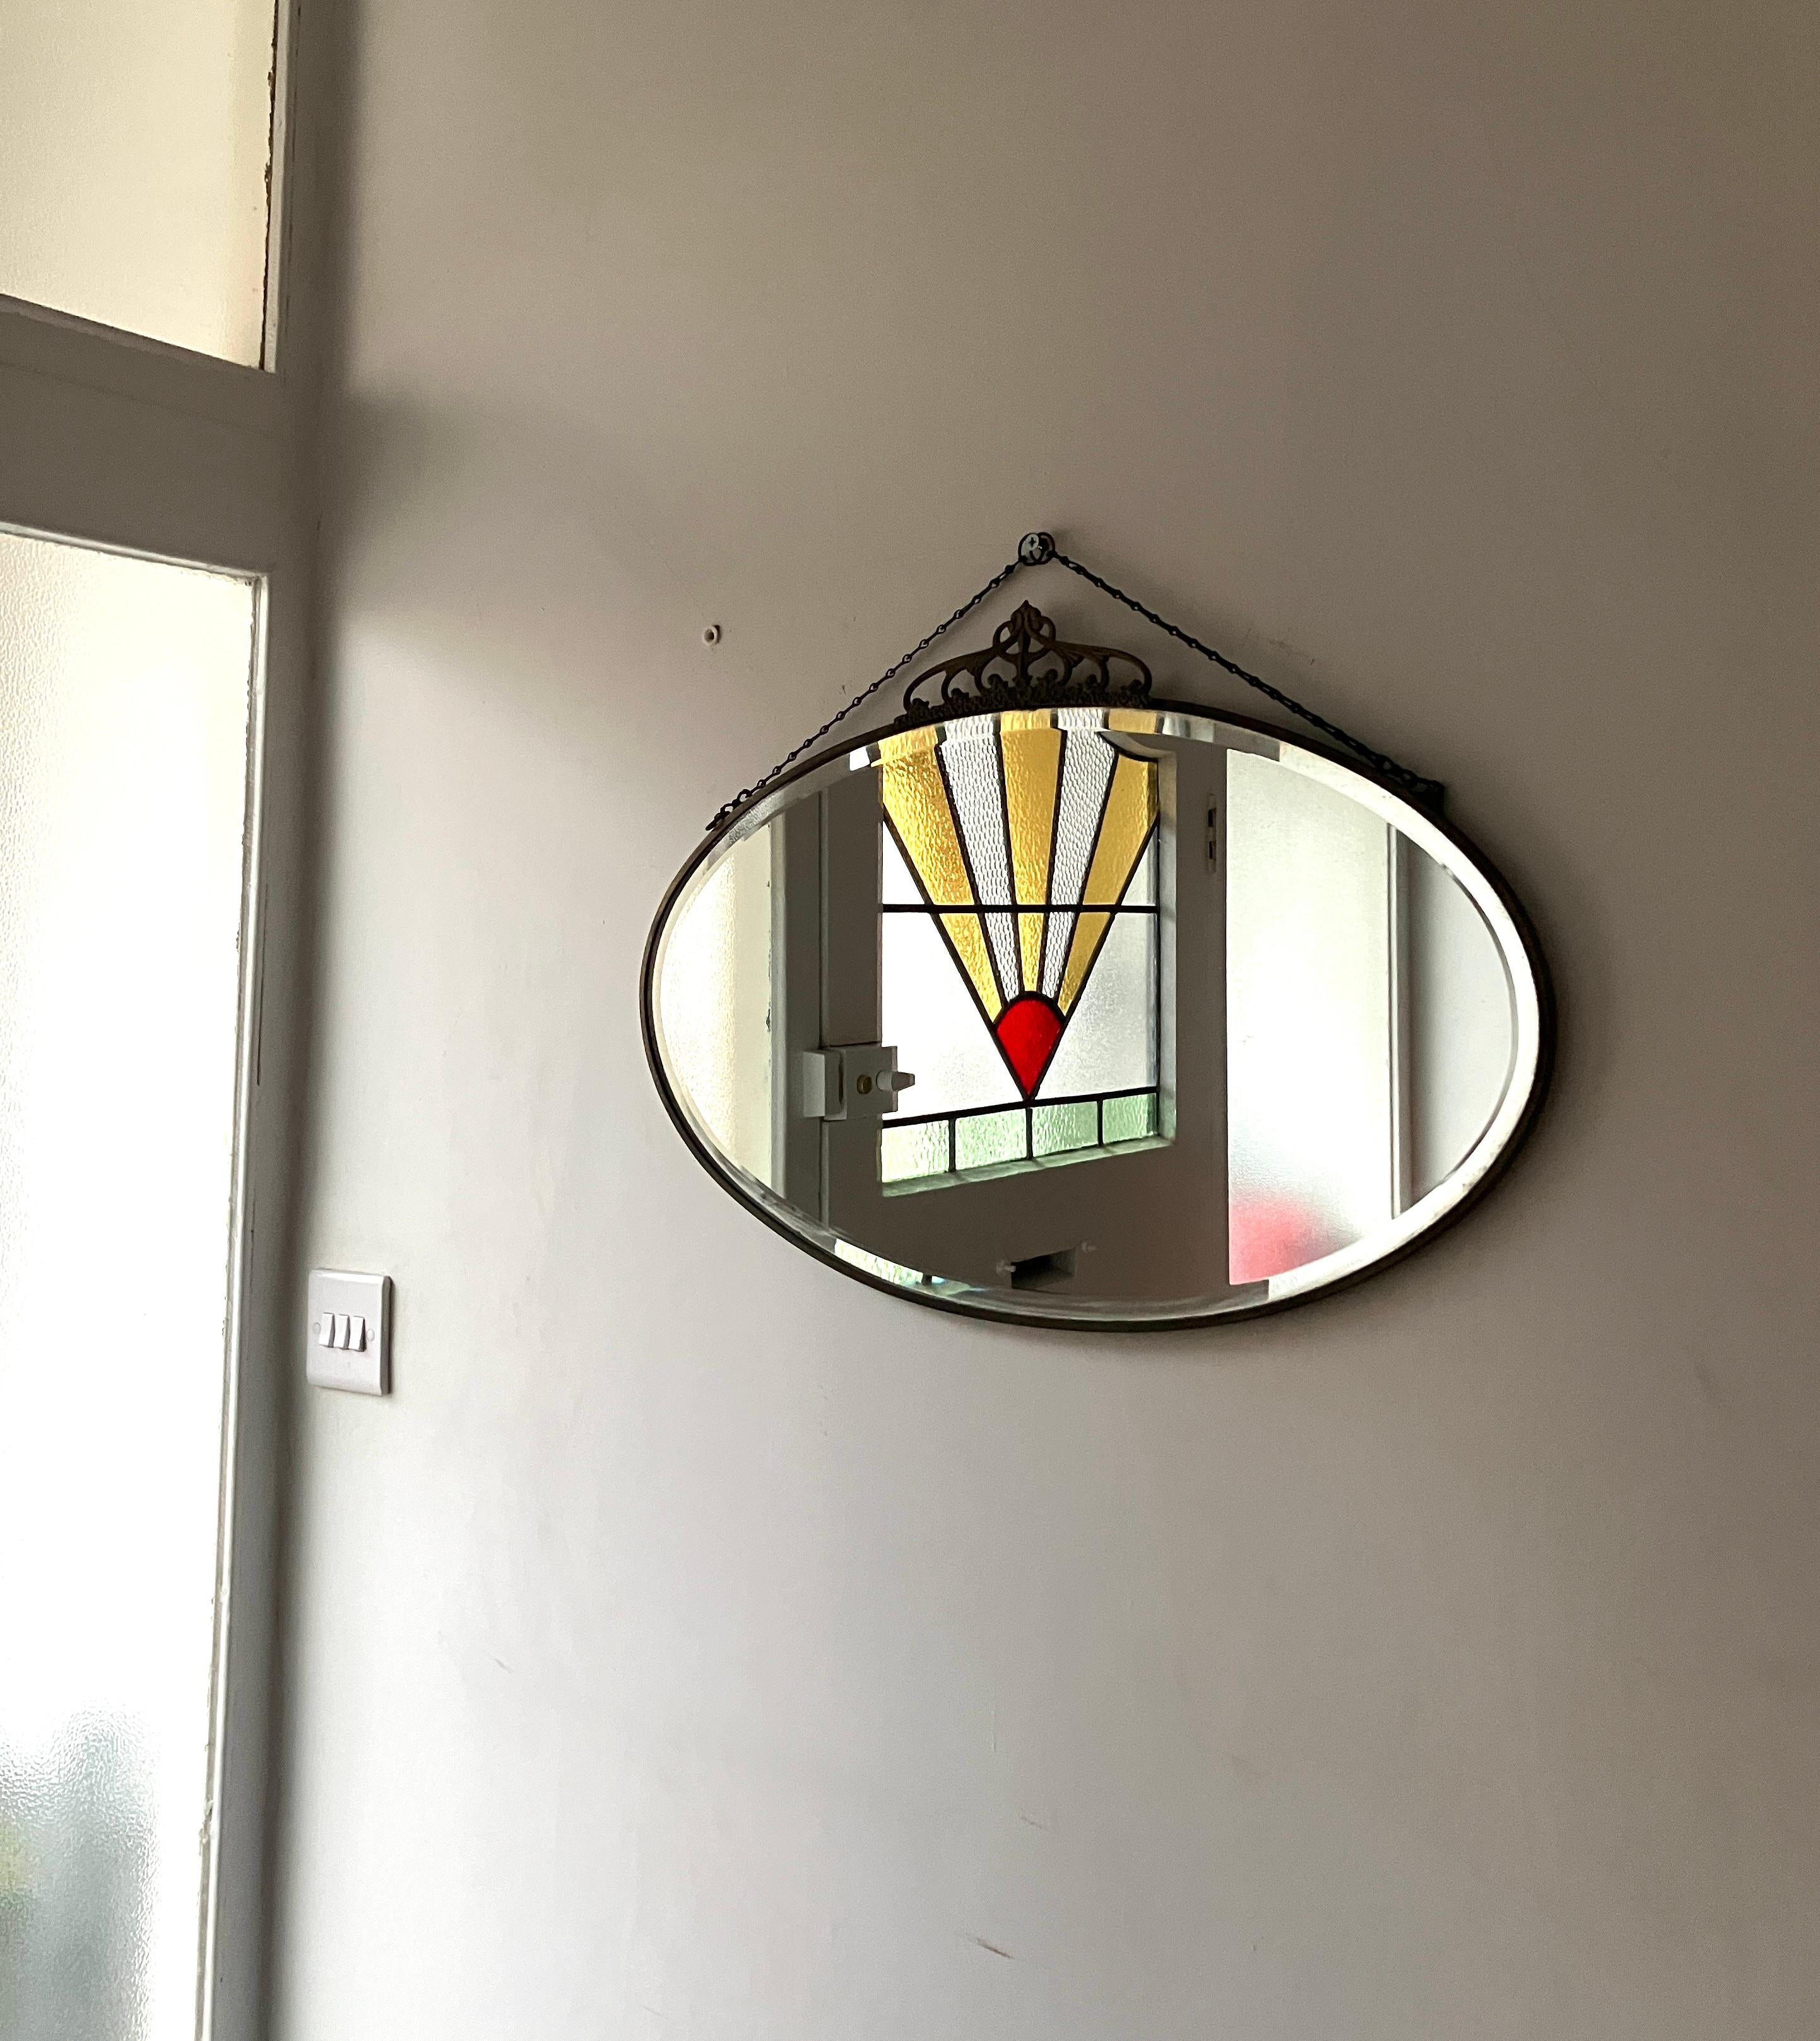 Beautiful antique oval wall hanging mirror from England. This oval mirror is brass framed with a decorative crown on top. There are maker marks at the back. Chain for hanging.

Size; 61cm wide, 35cm high plus 6cm for the crown. 

The mirror is in